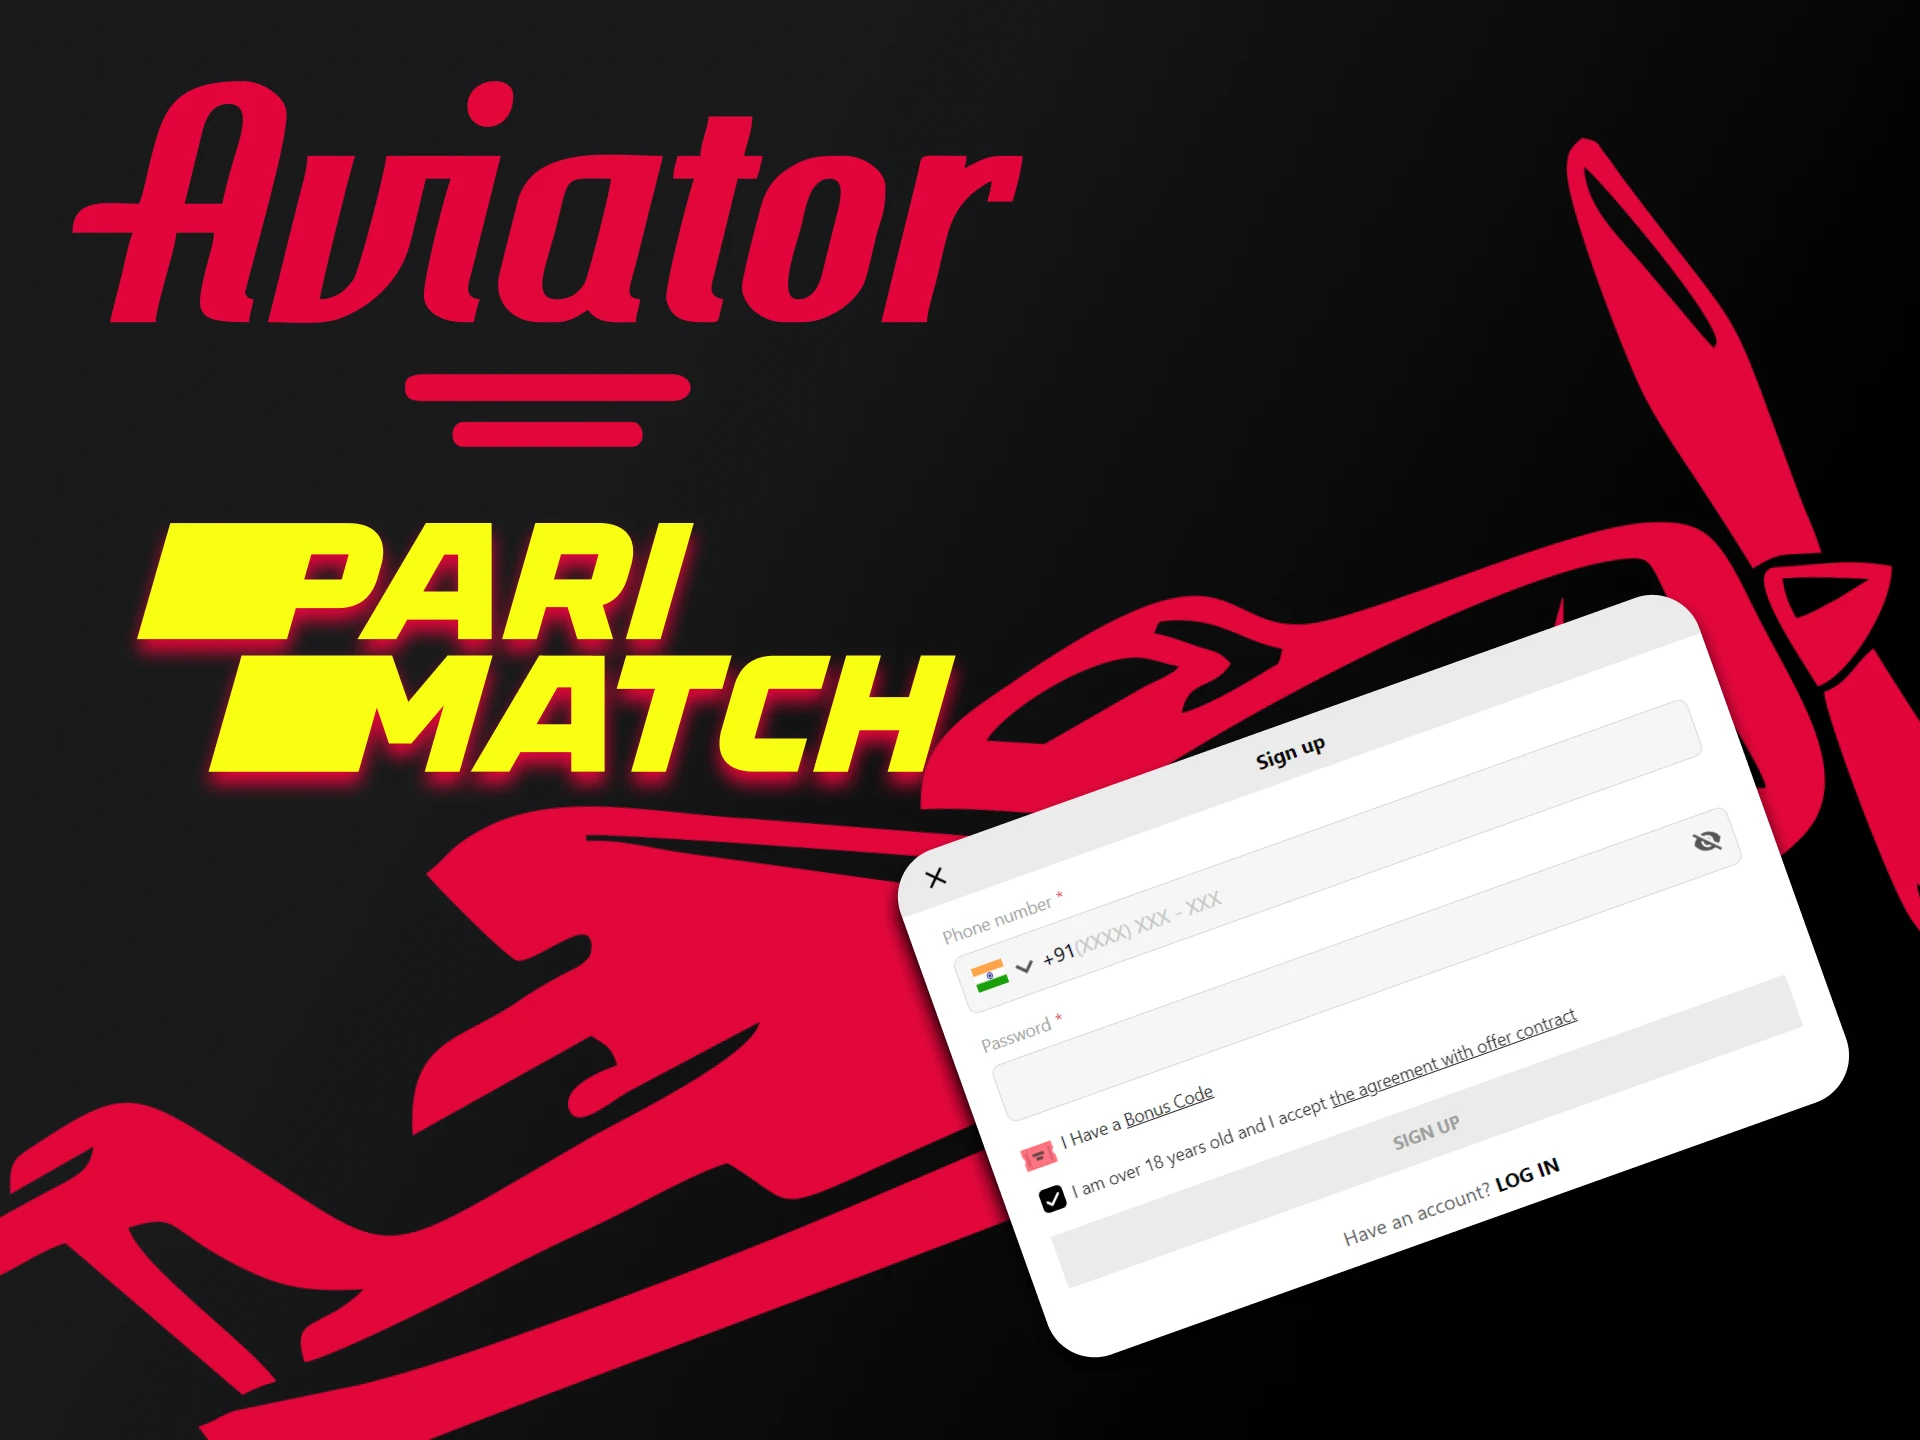 Create a personal account on Parimatch to play Aviator.